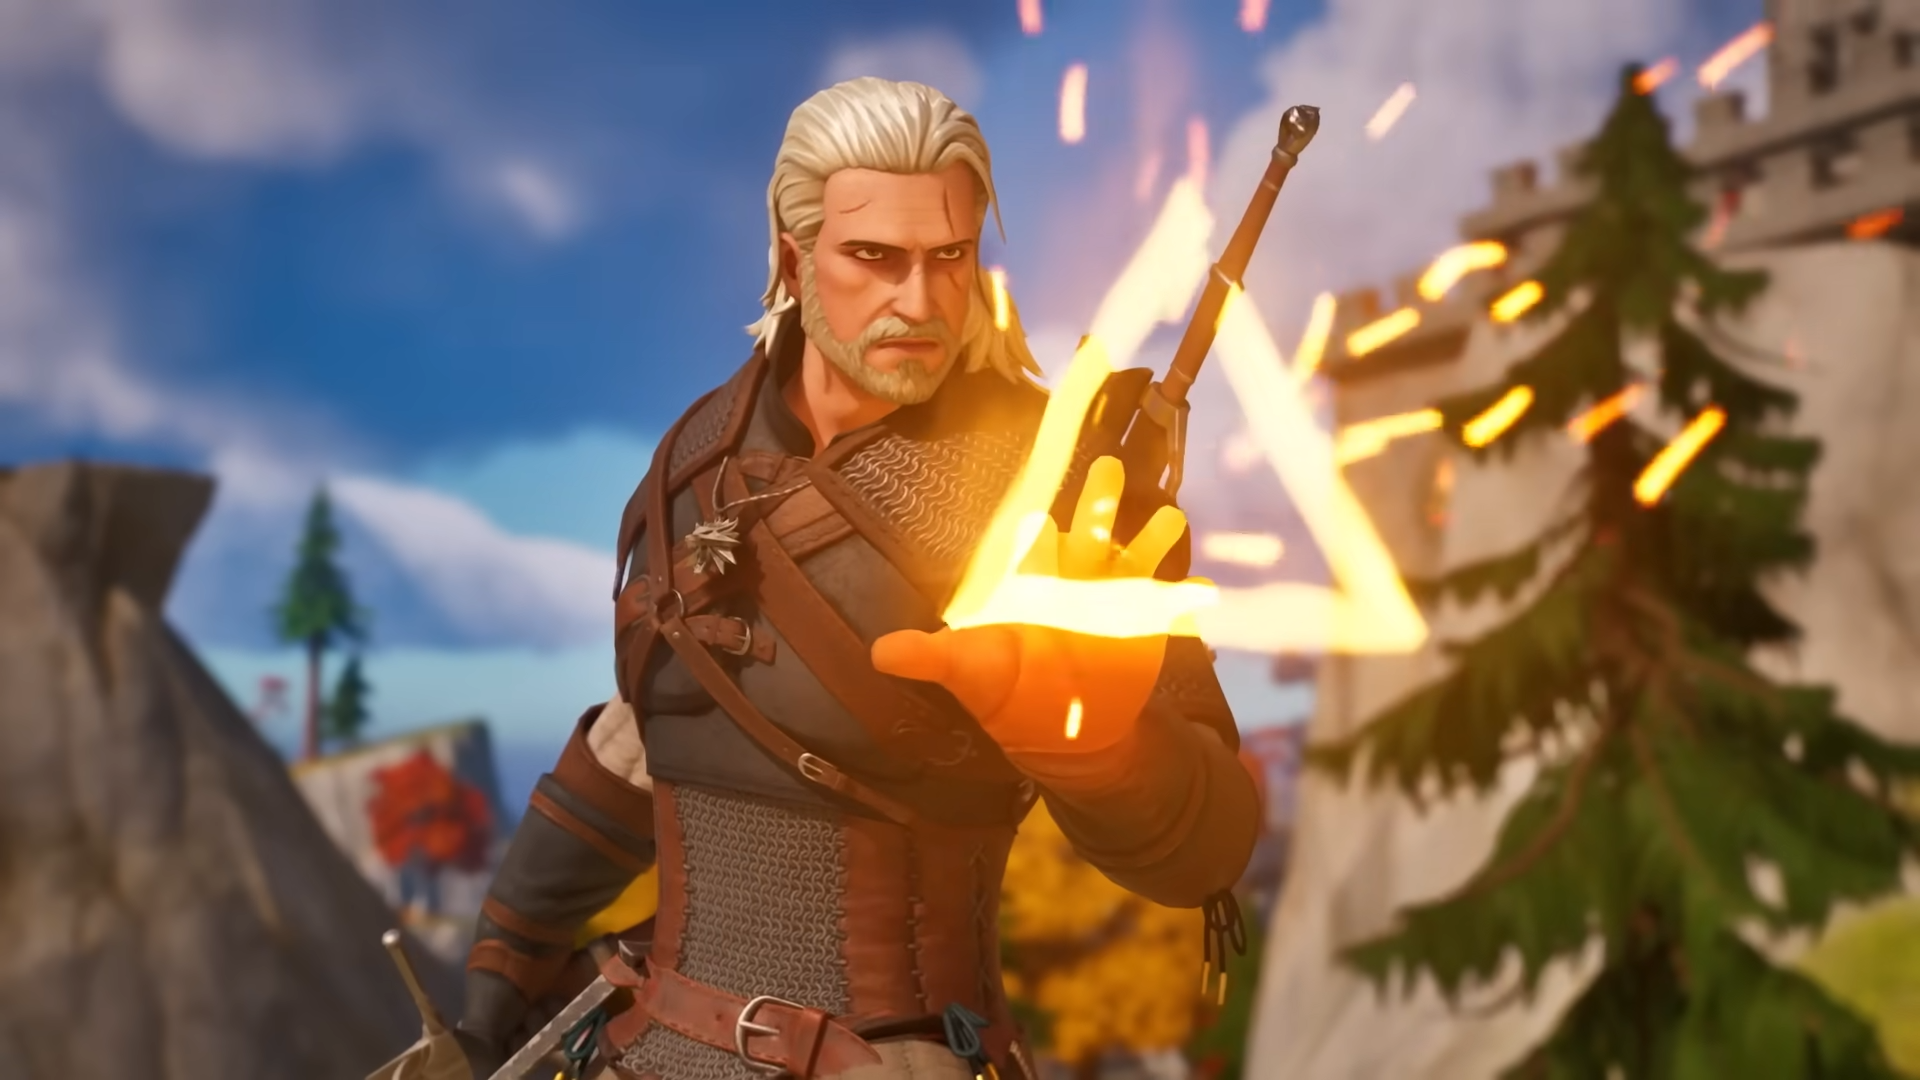 Geralt from The Witcher casting a sign in Fortnite